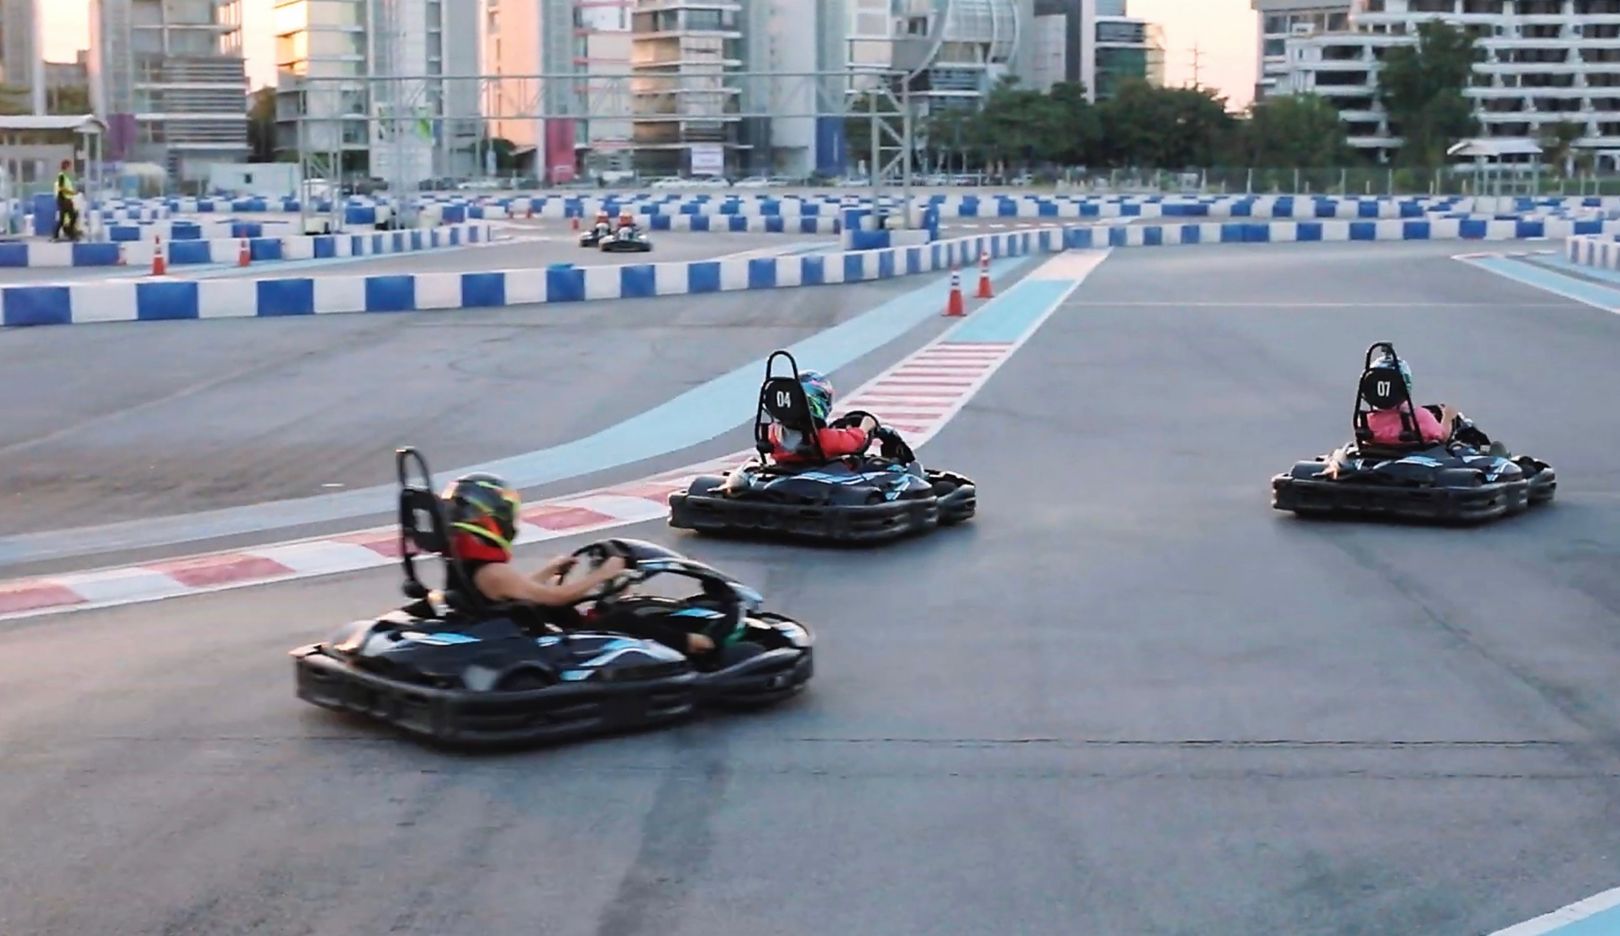 Impact Speed Park: “You can work on your driving skills in electric or gas-powered go-karts here.”